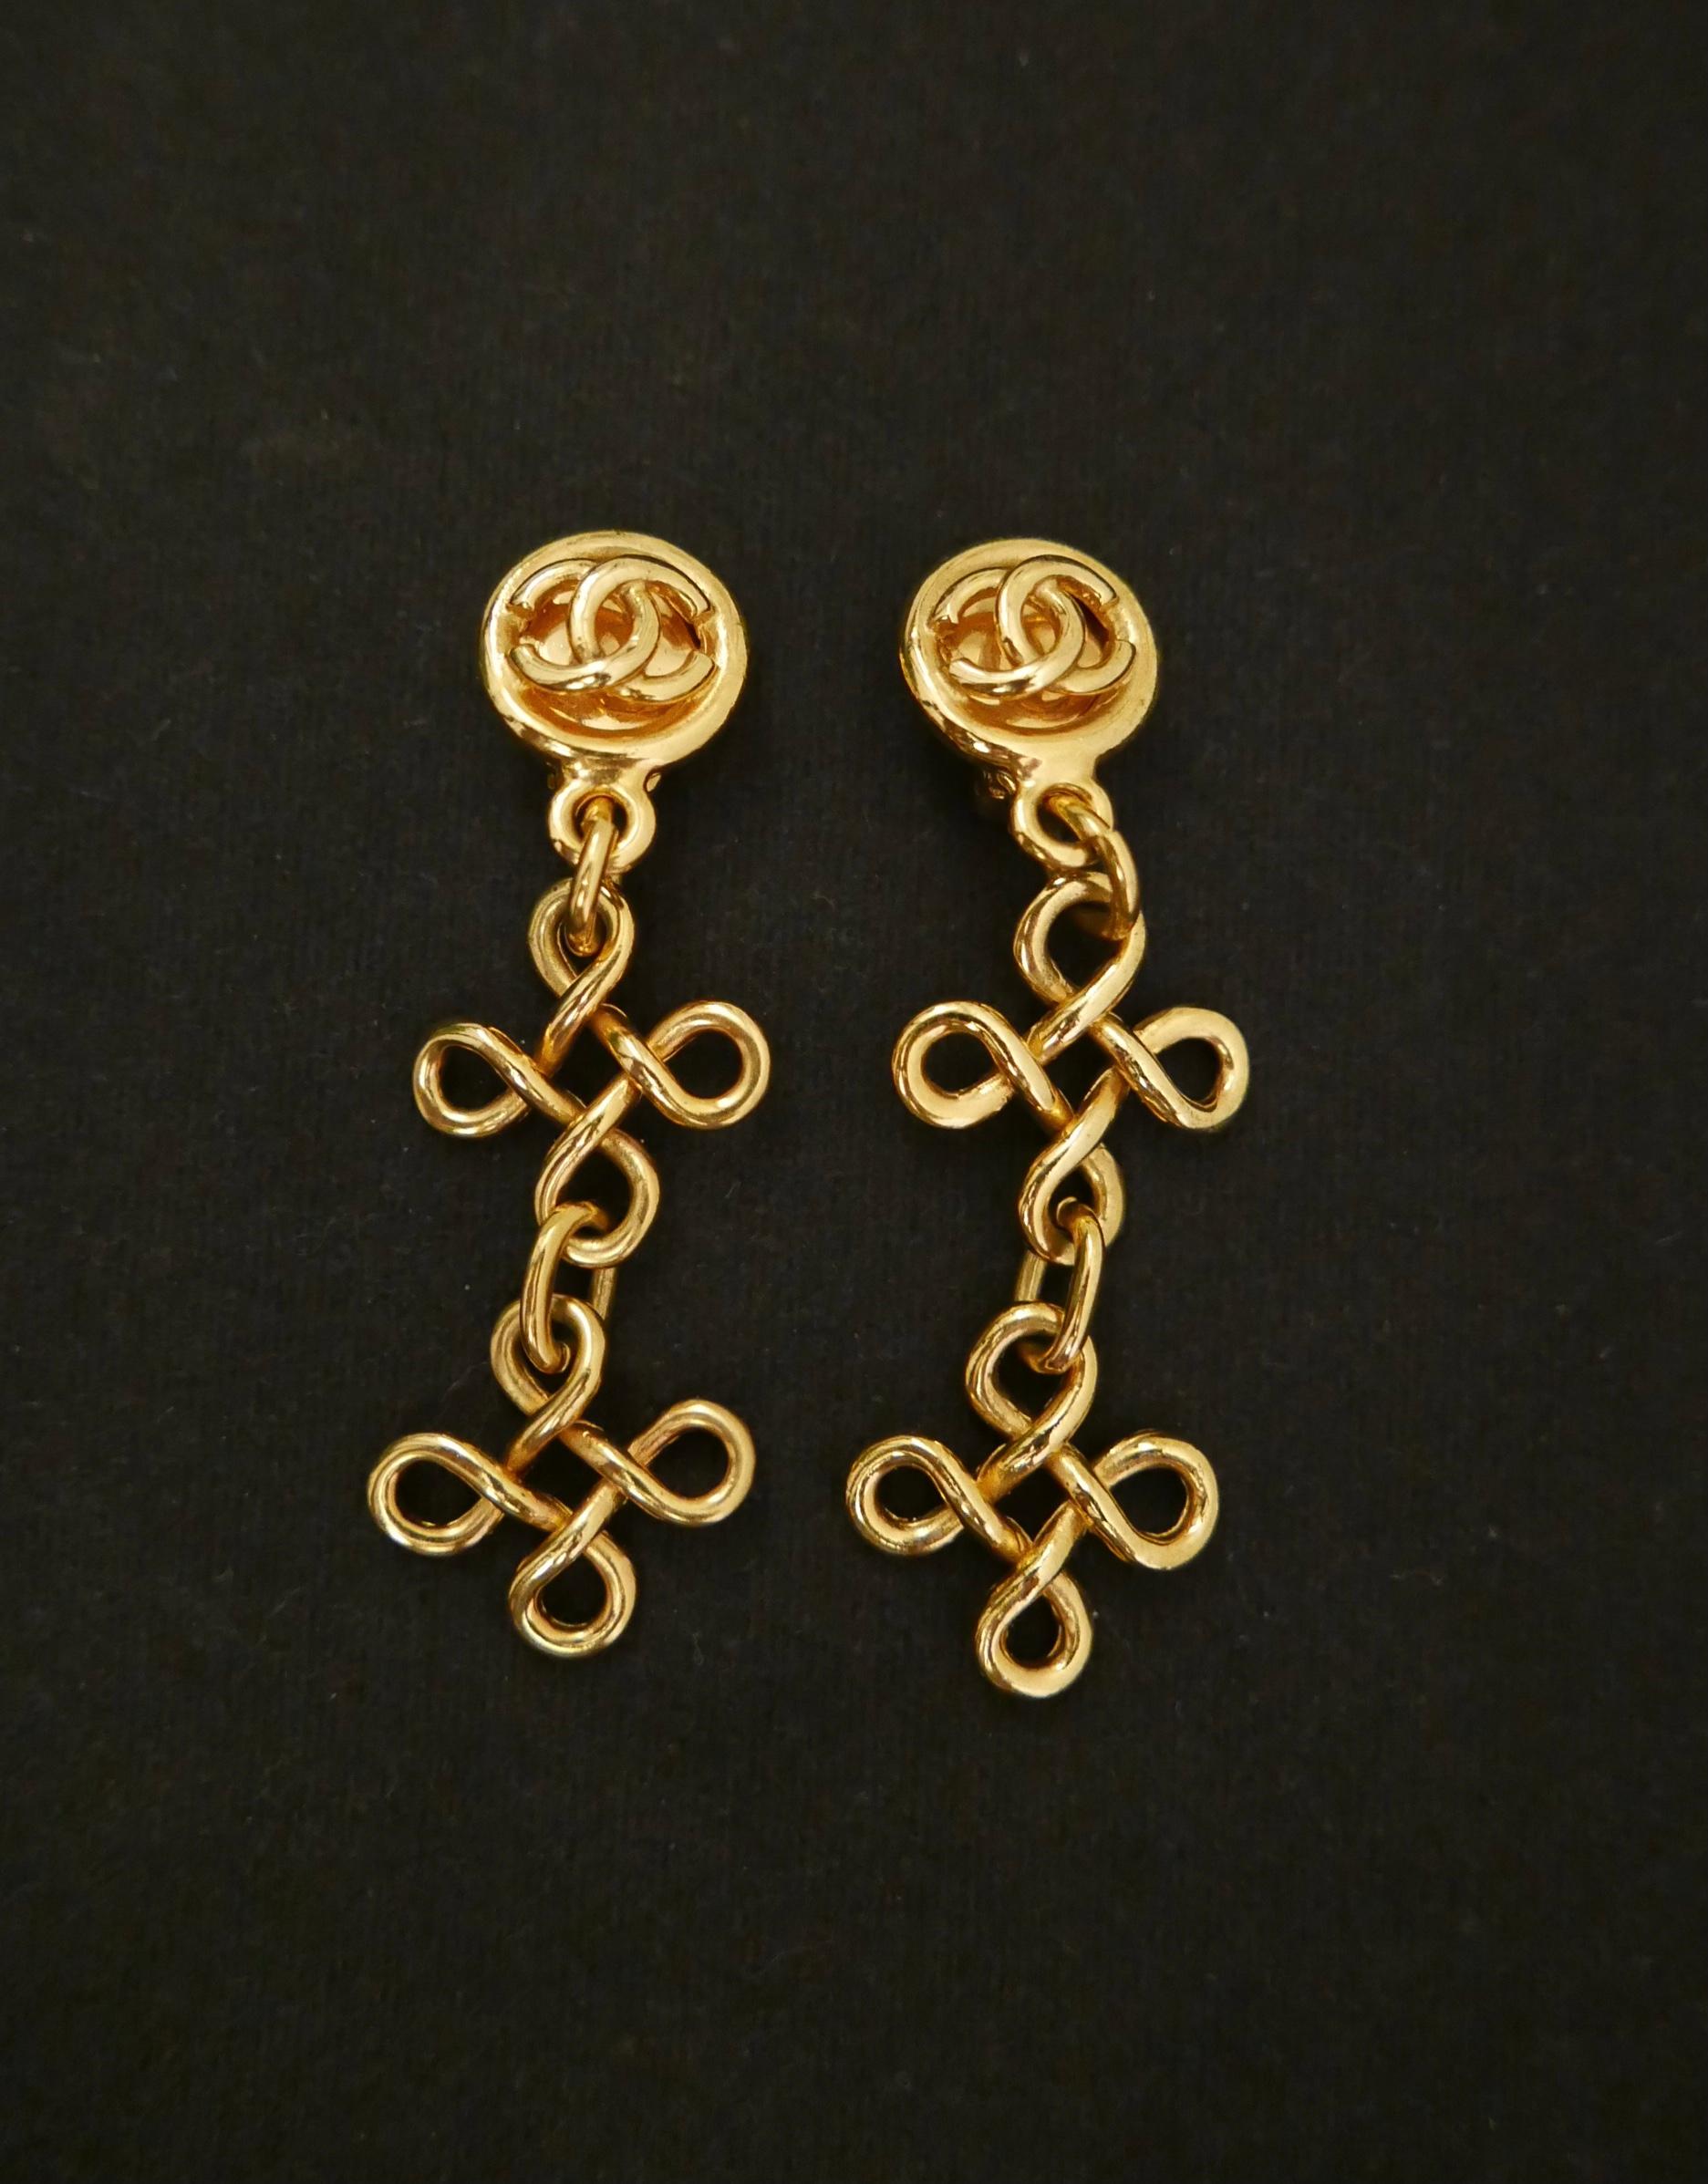 Vintage CHANEL gold toned dangle ear-clips featuring a CC logo and two tiers of clover motifs. An absolute stunning piece to add to your vintage collection. Stamped 93P, made in France. Measures approximately 2.4 x 7.6 cm. Clip on style. Come with